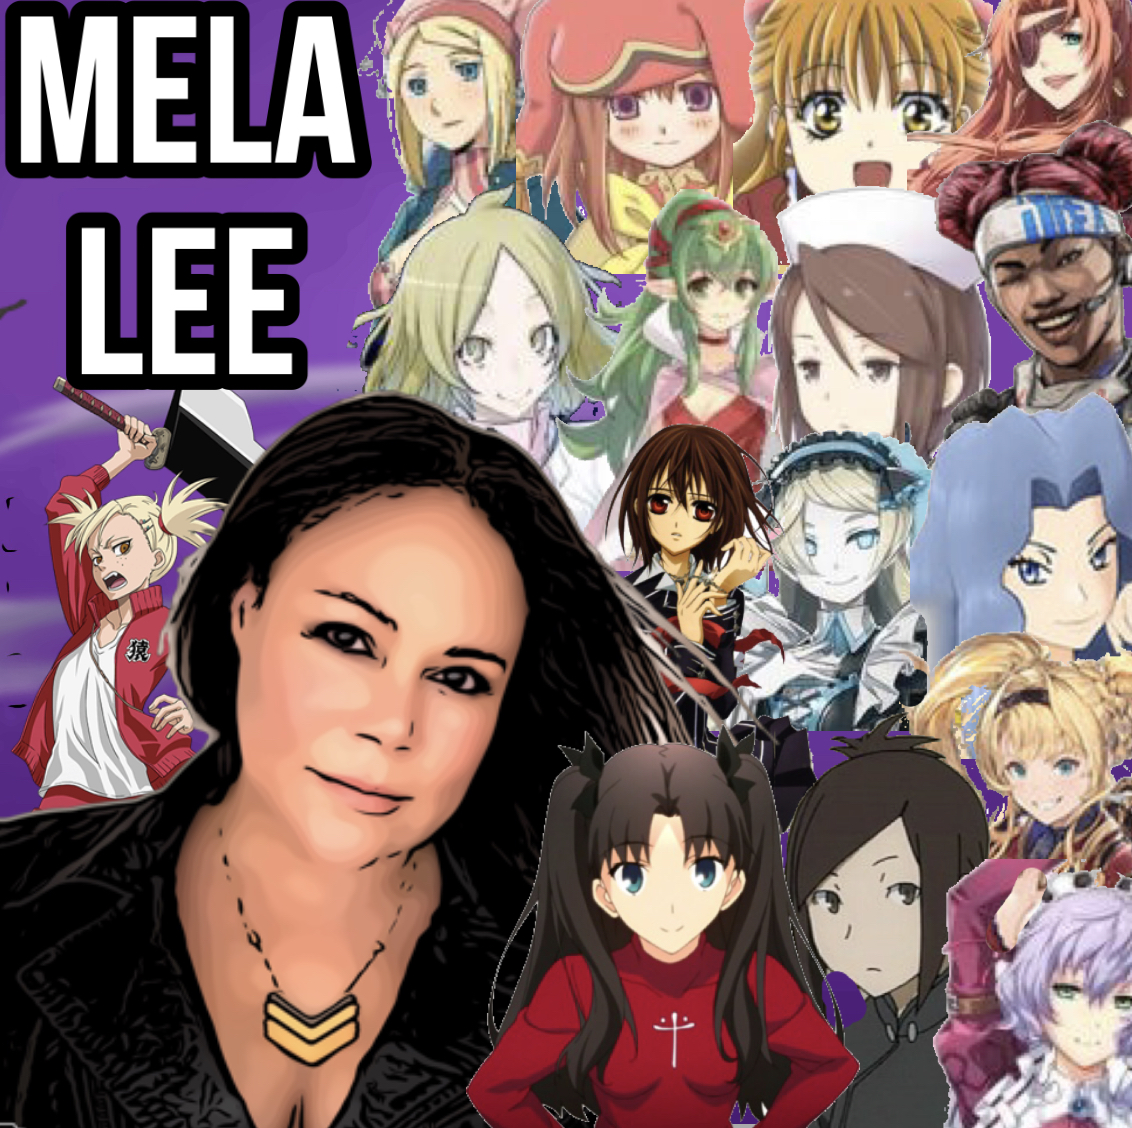 The Mela Lee experience by tim90skid1991 on DeviantArt